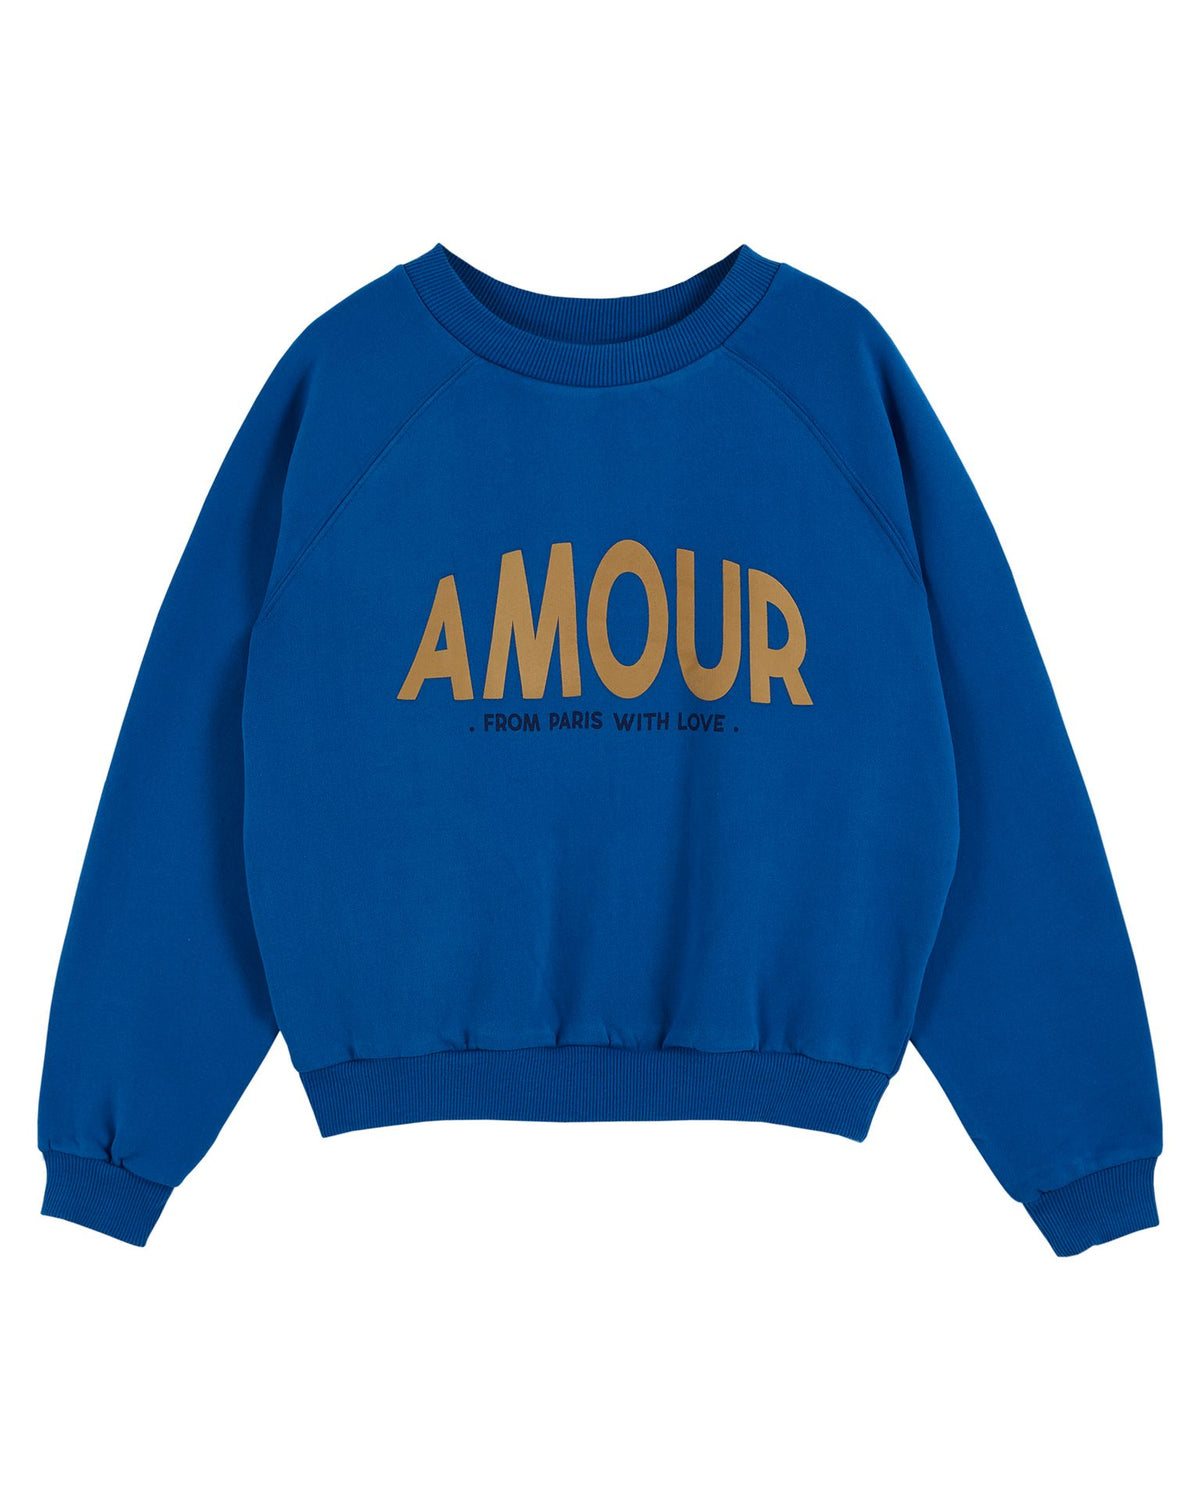 Blue coloured scoop neck sweatshirt with raglan sleeves and "amour" logo on the centre front